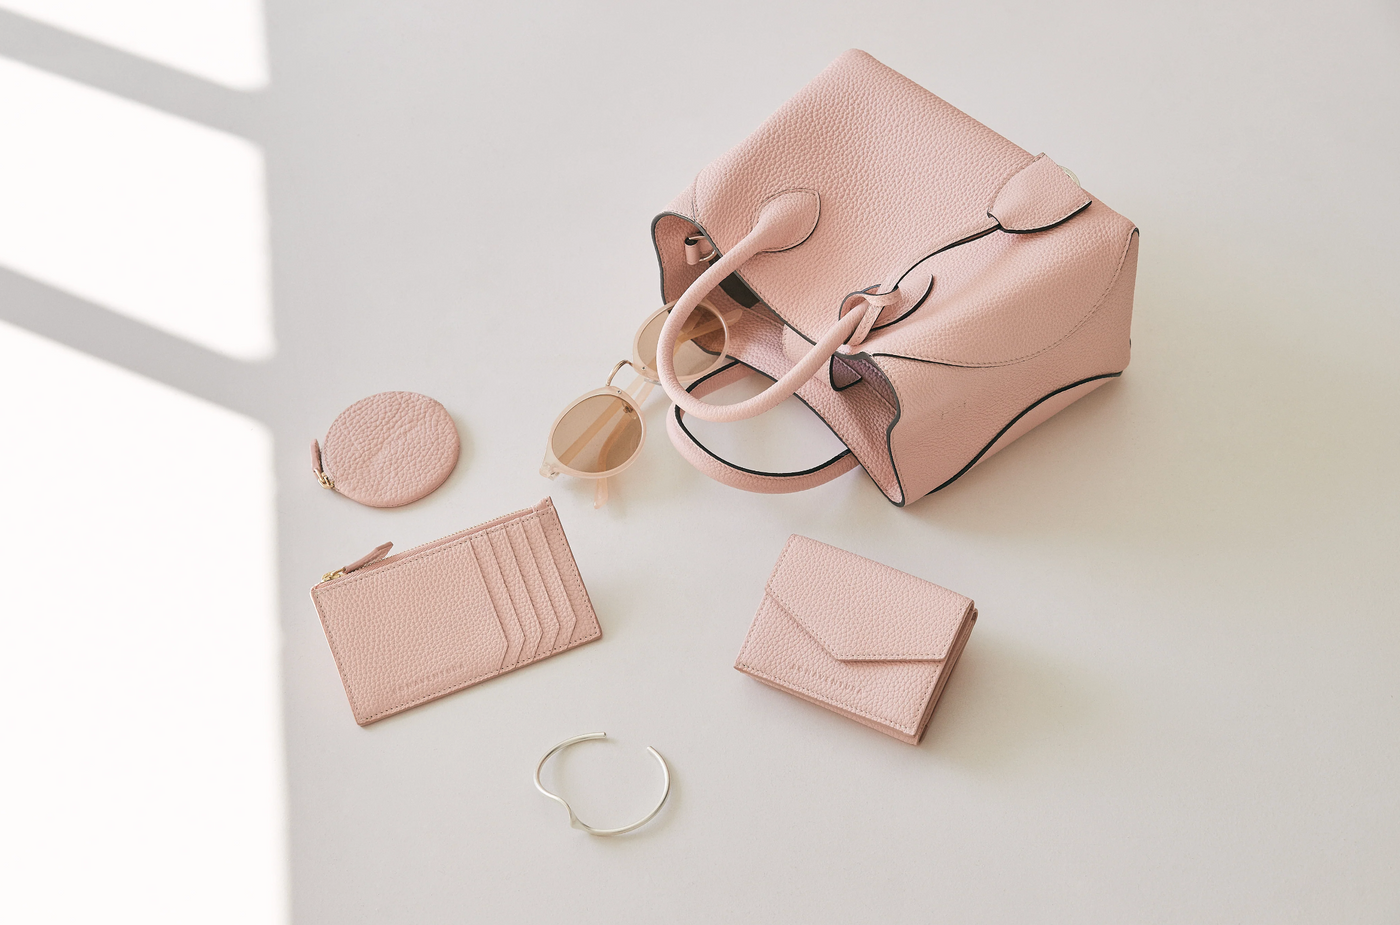 Pastel-colored leather handbags in spring decoration